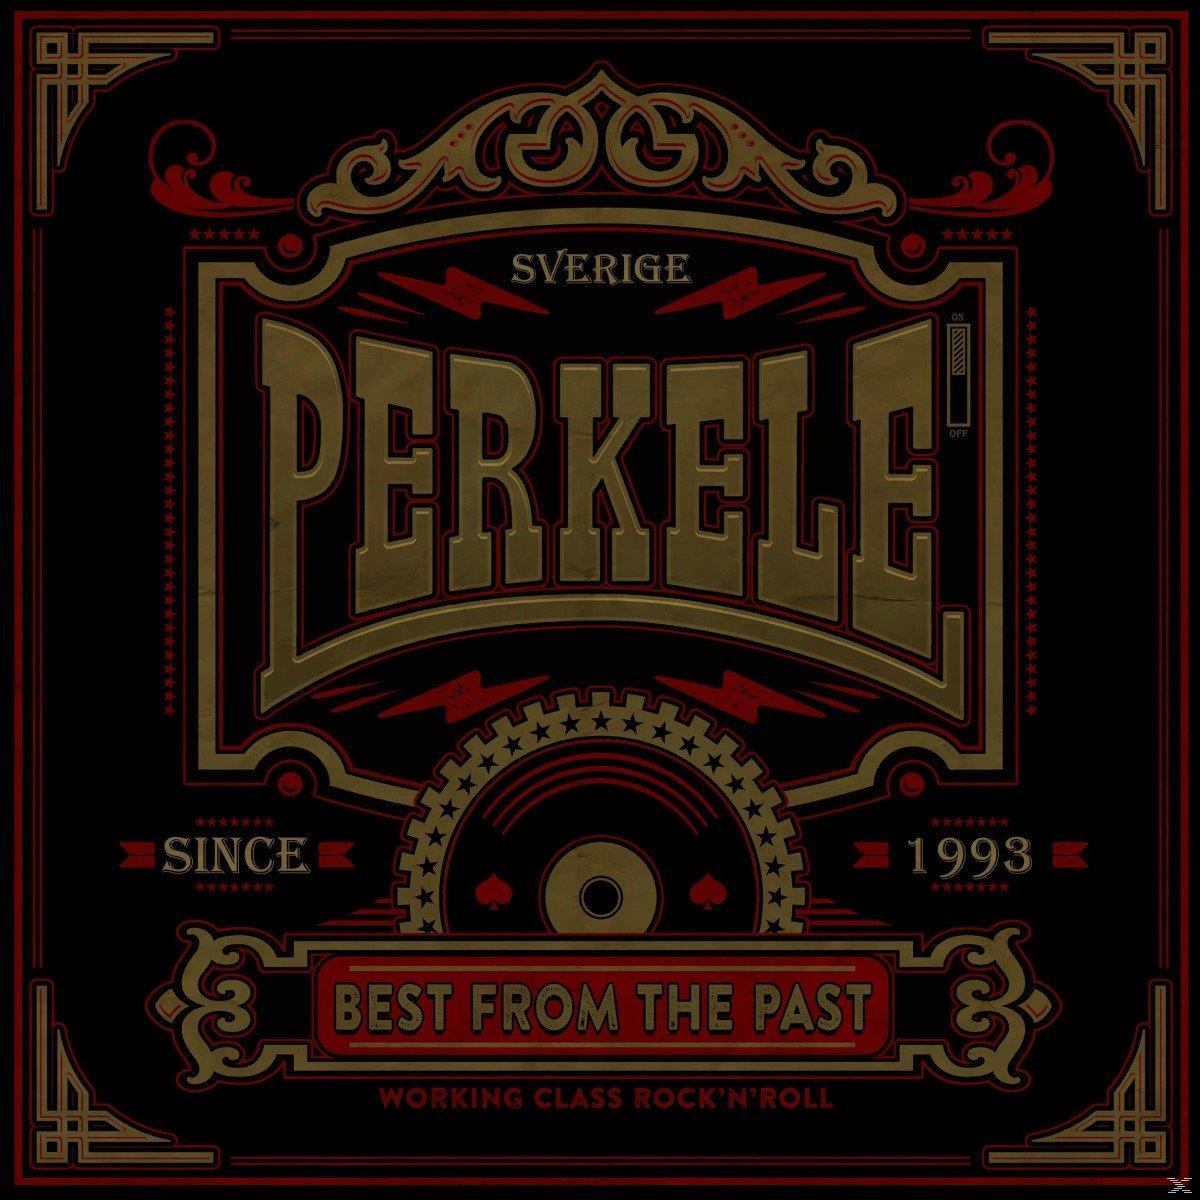 Best Past - From (CD) The - Perkele